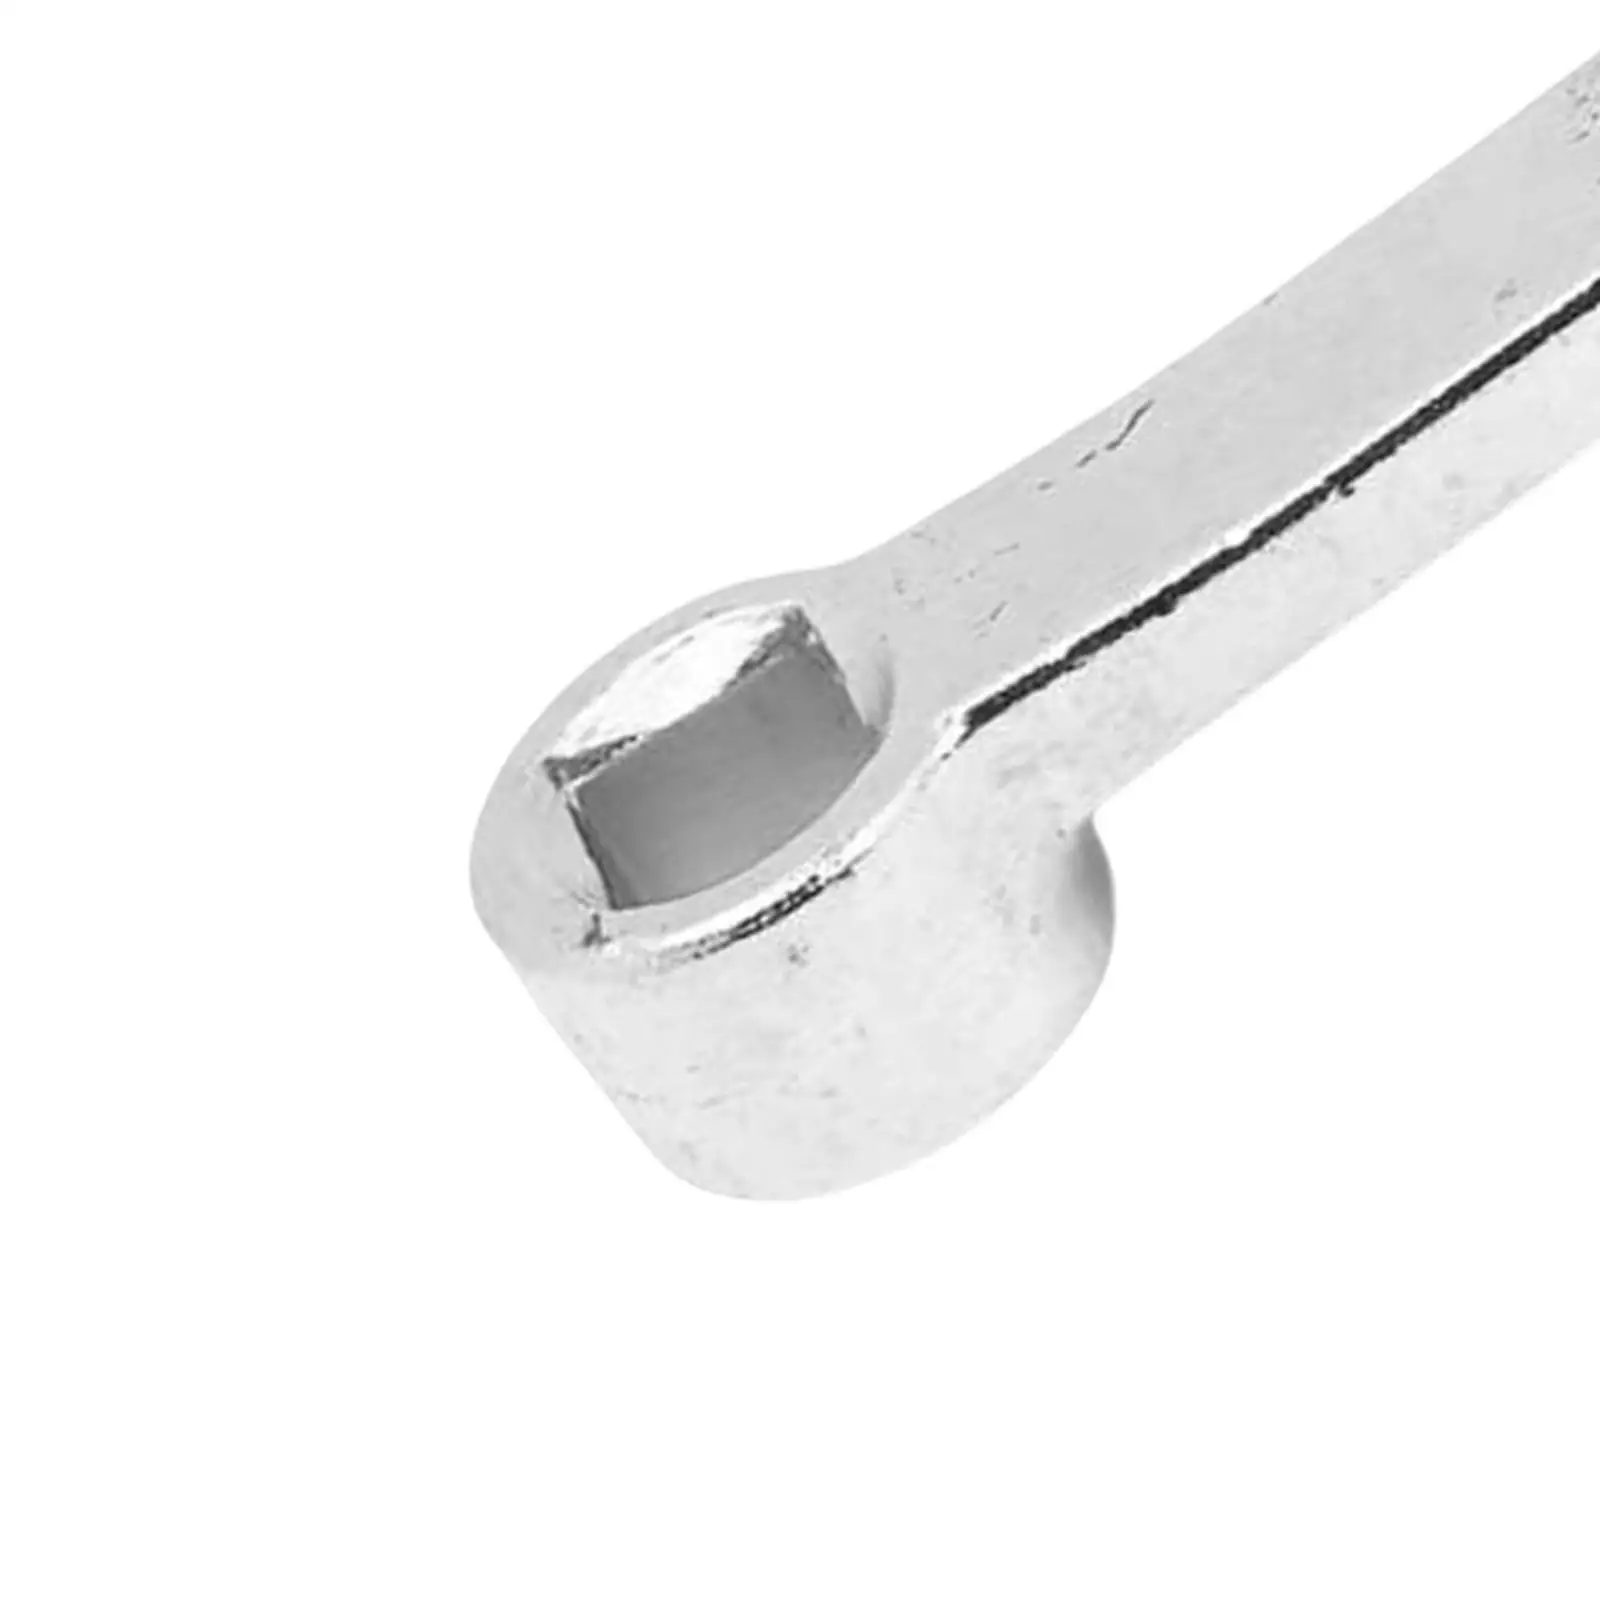 Camber Adjusting Wrench T10179 Durable for Car Repair Wheel Alignment Tool